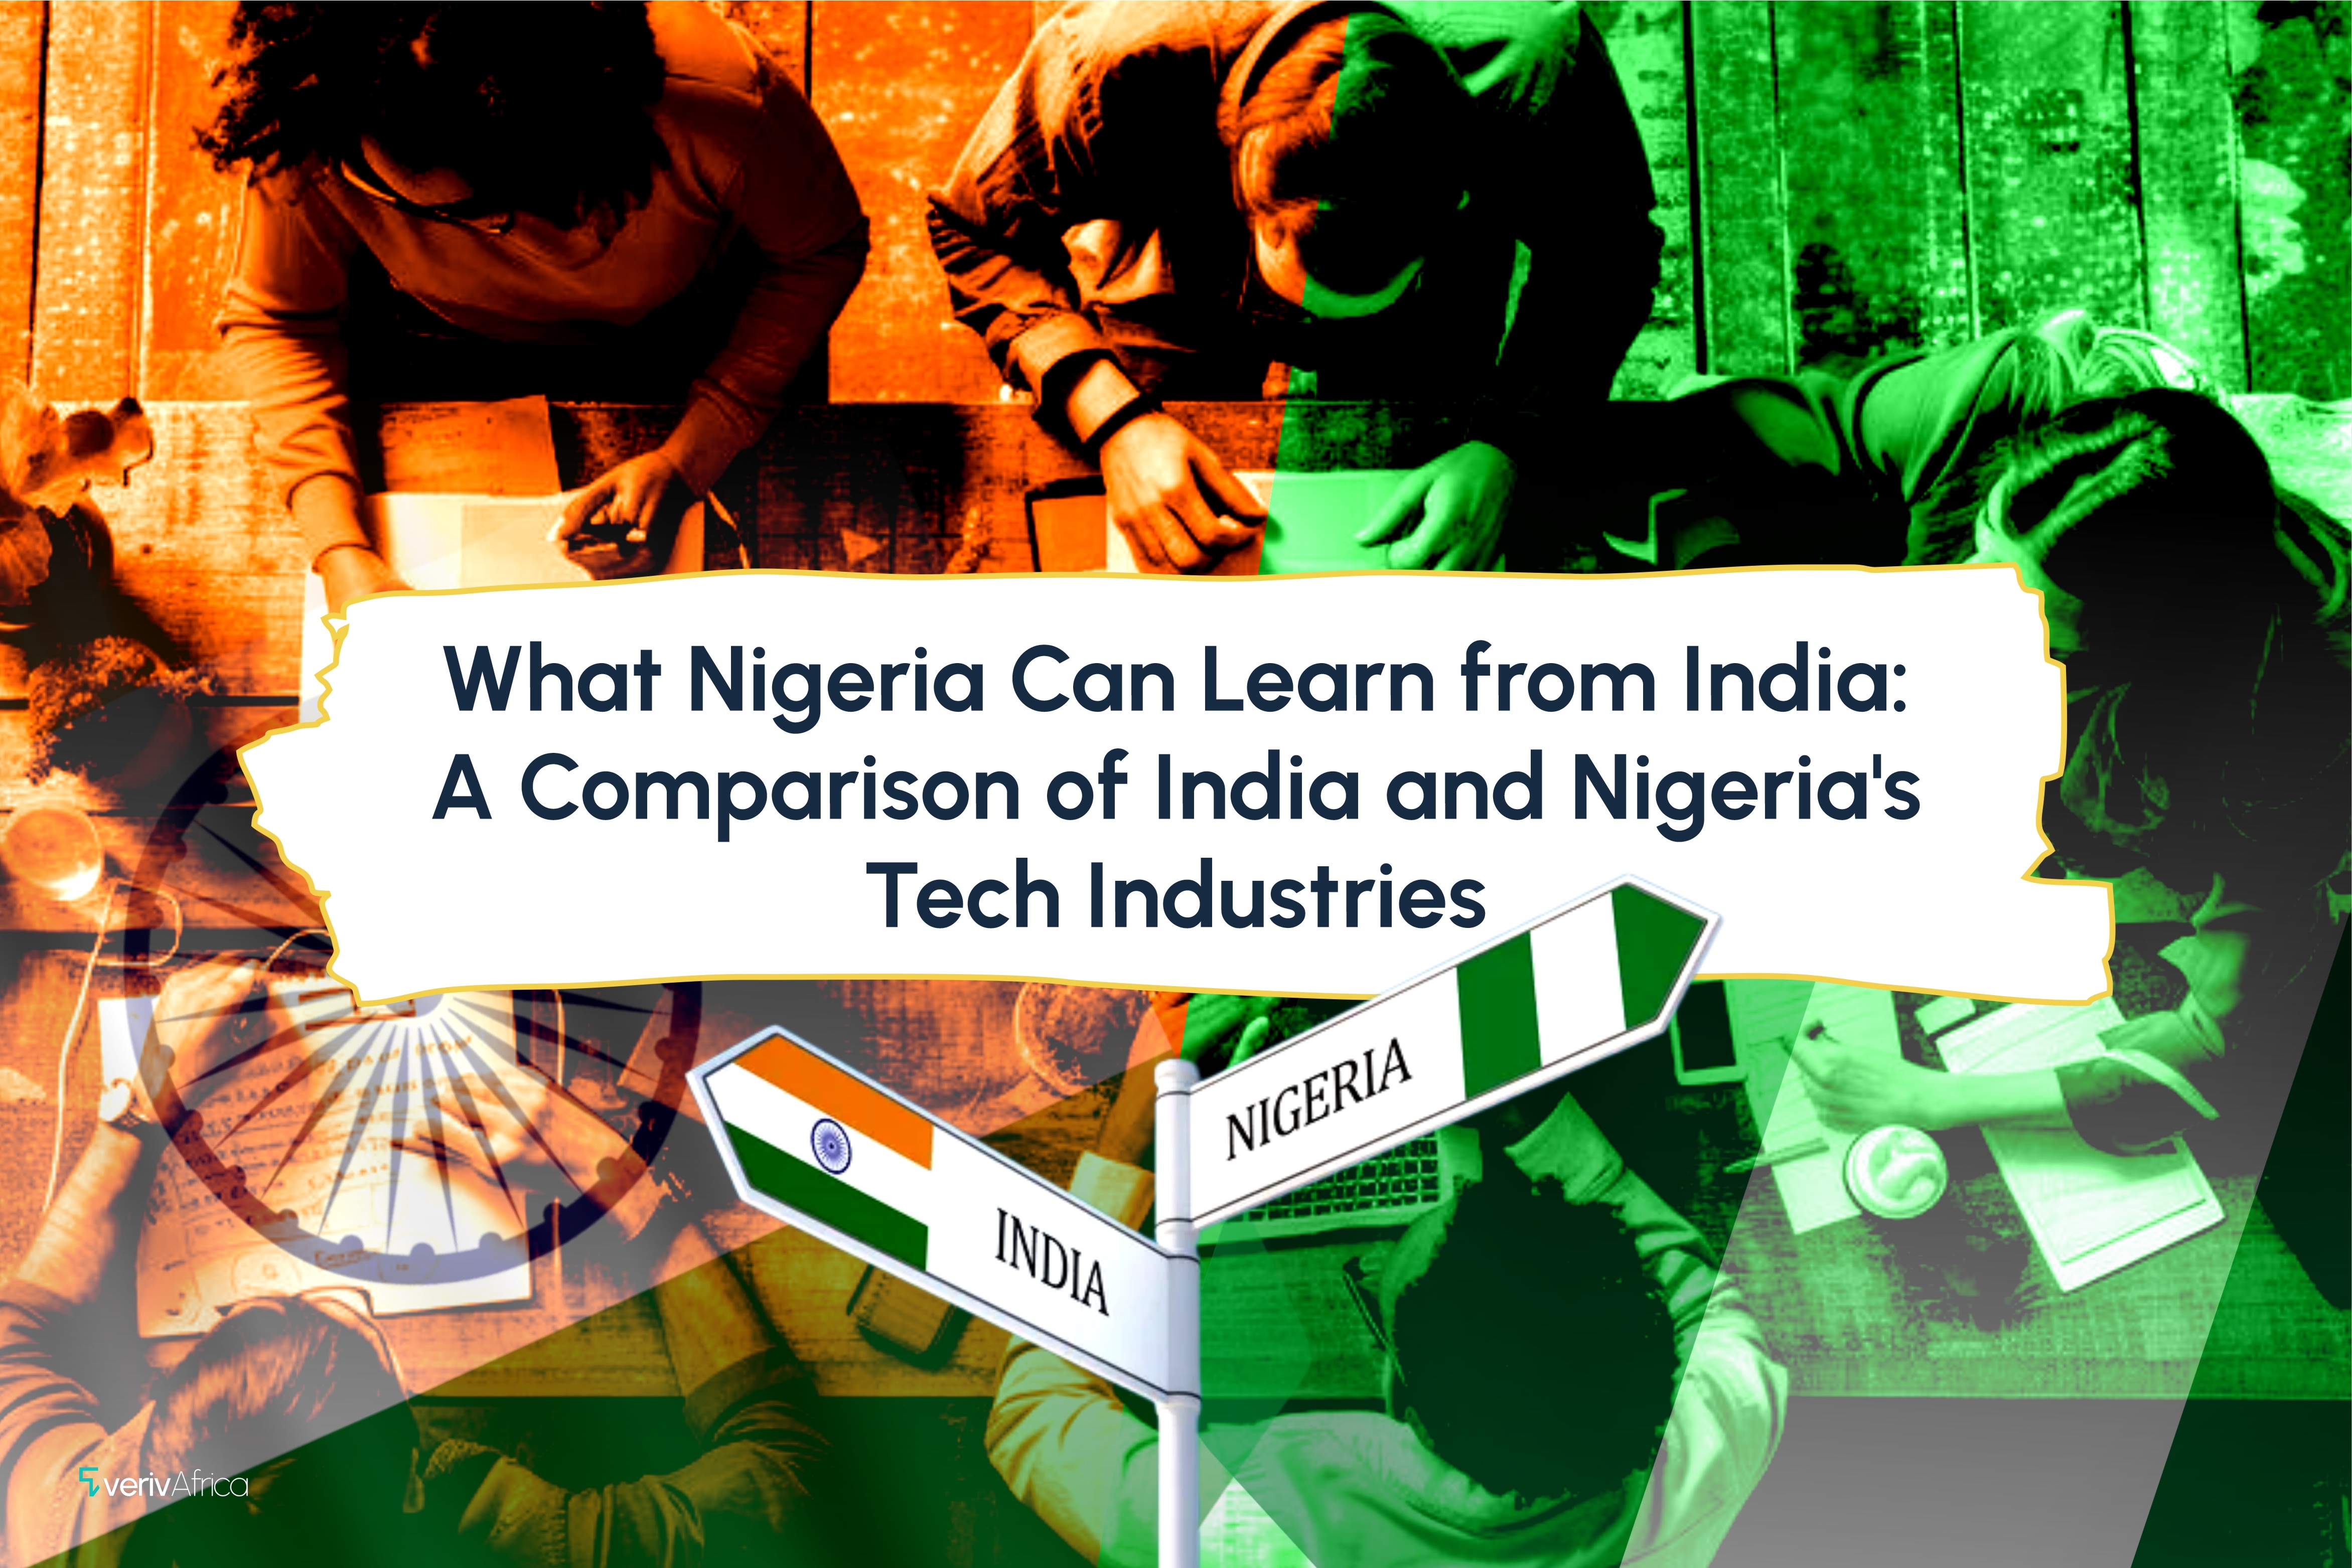 What Nigeria Can Learn from India: A Comparison of India and Nigeria's Tech Industries